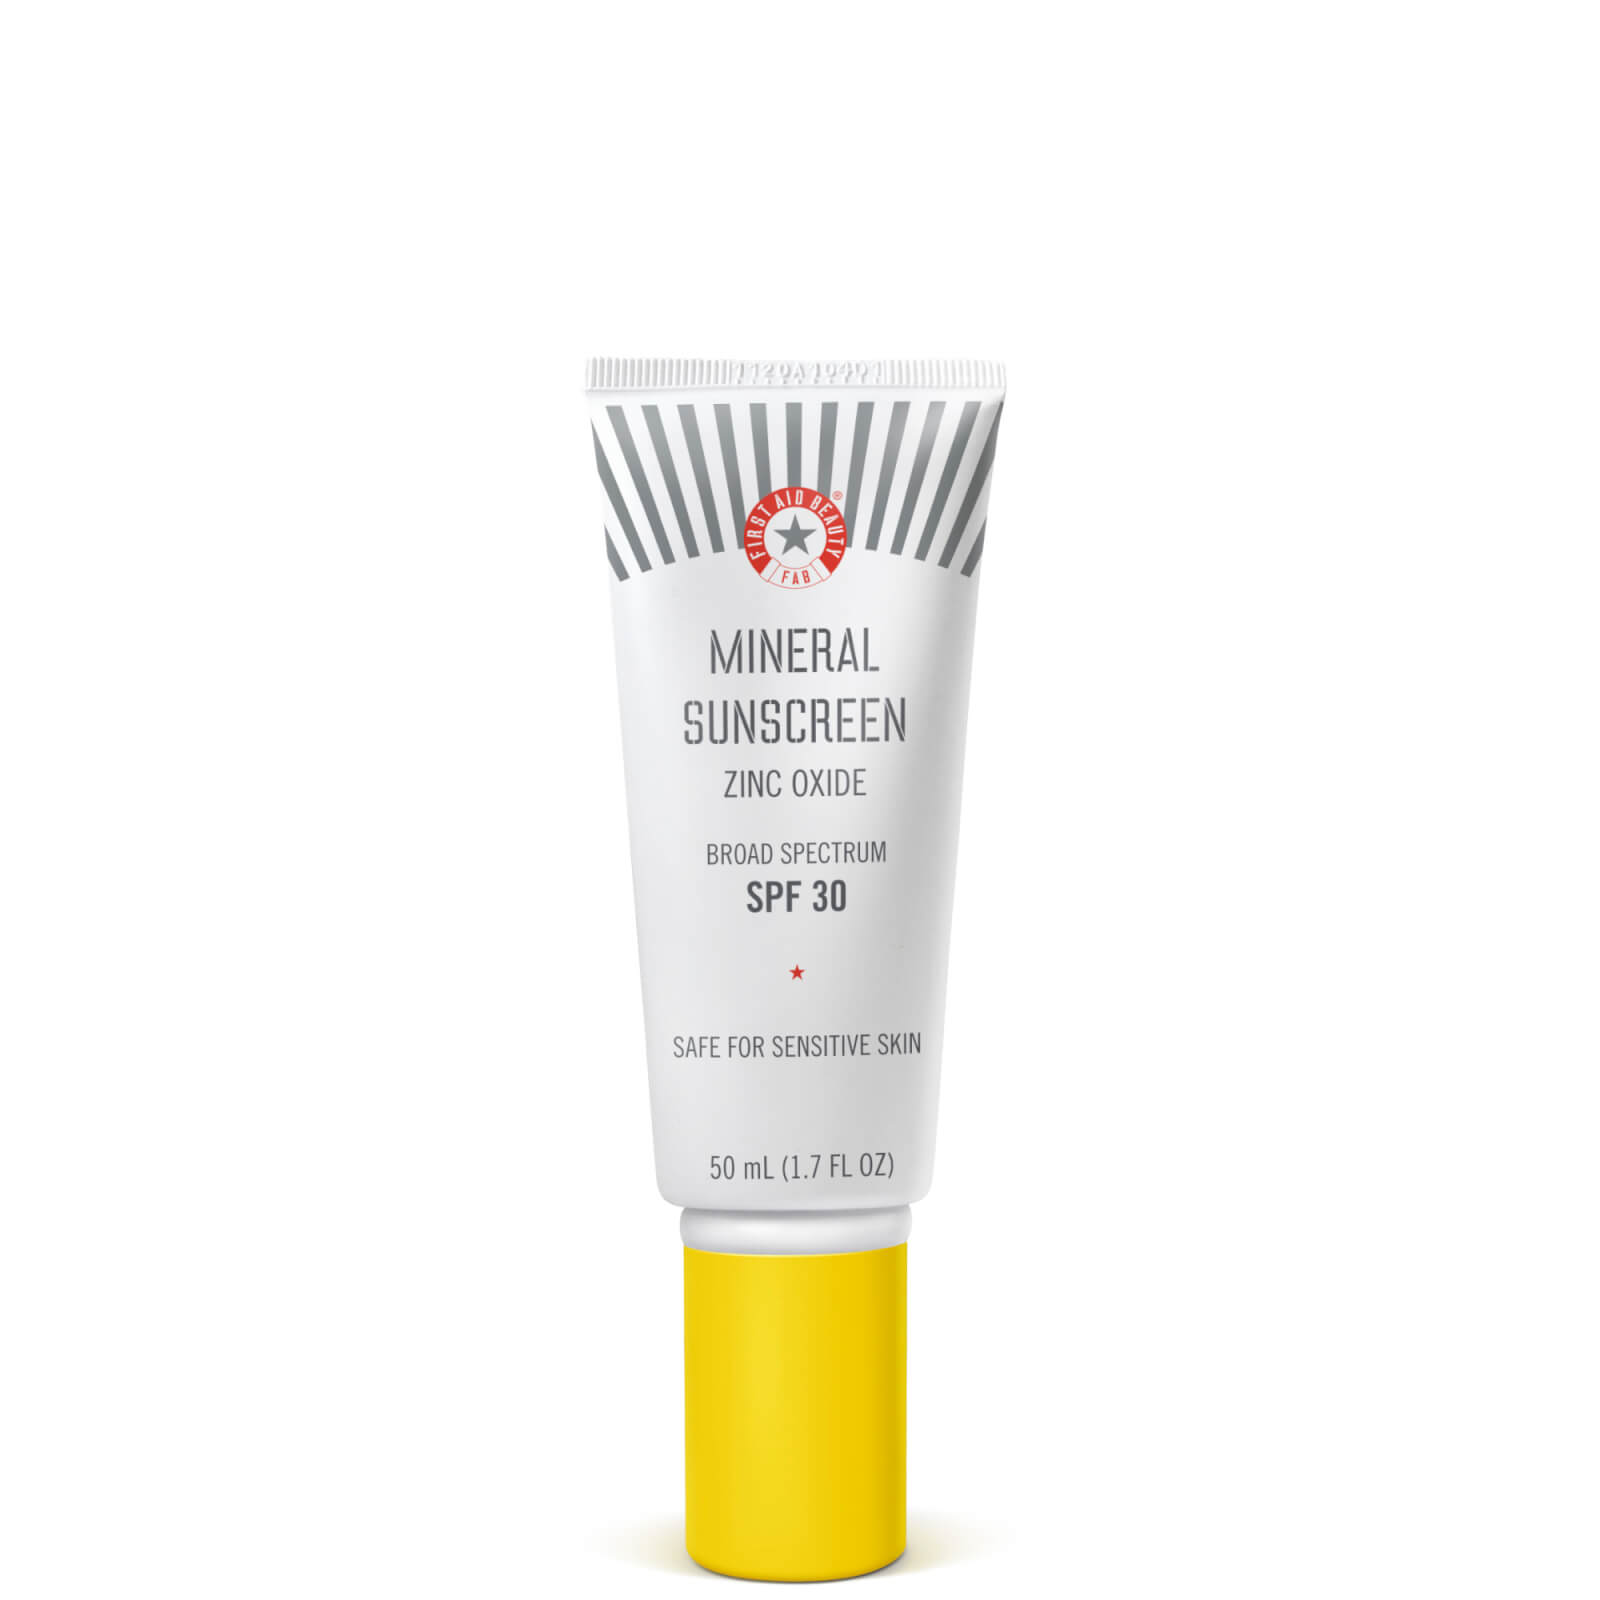 First Aid Beauty Mineral Sunscreen Zinc Oxide Broad Spectrum Spf30 50ml In White